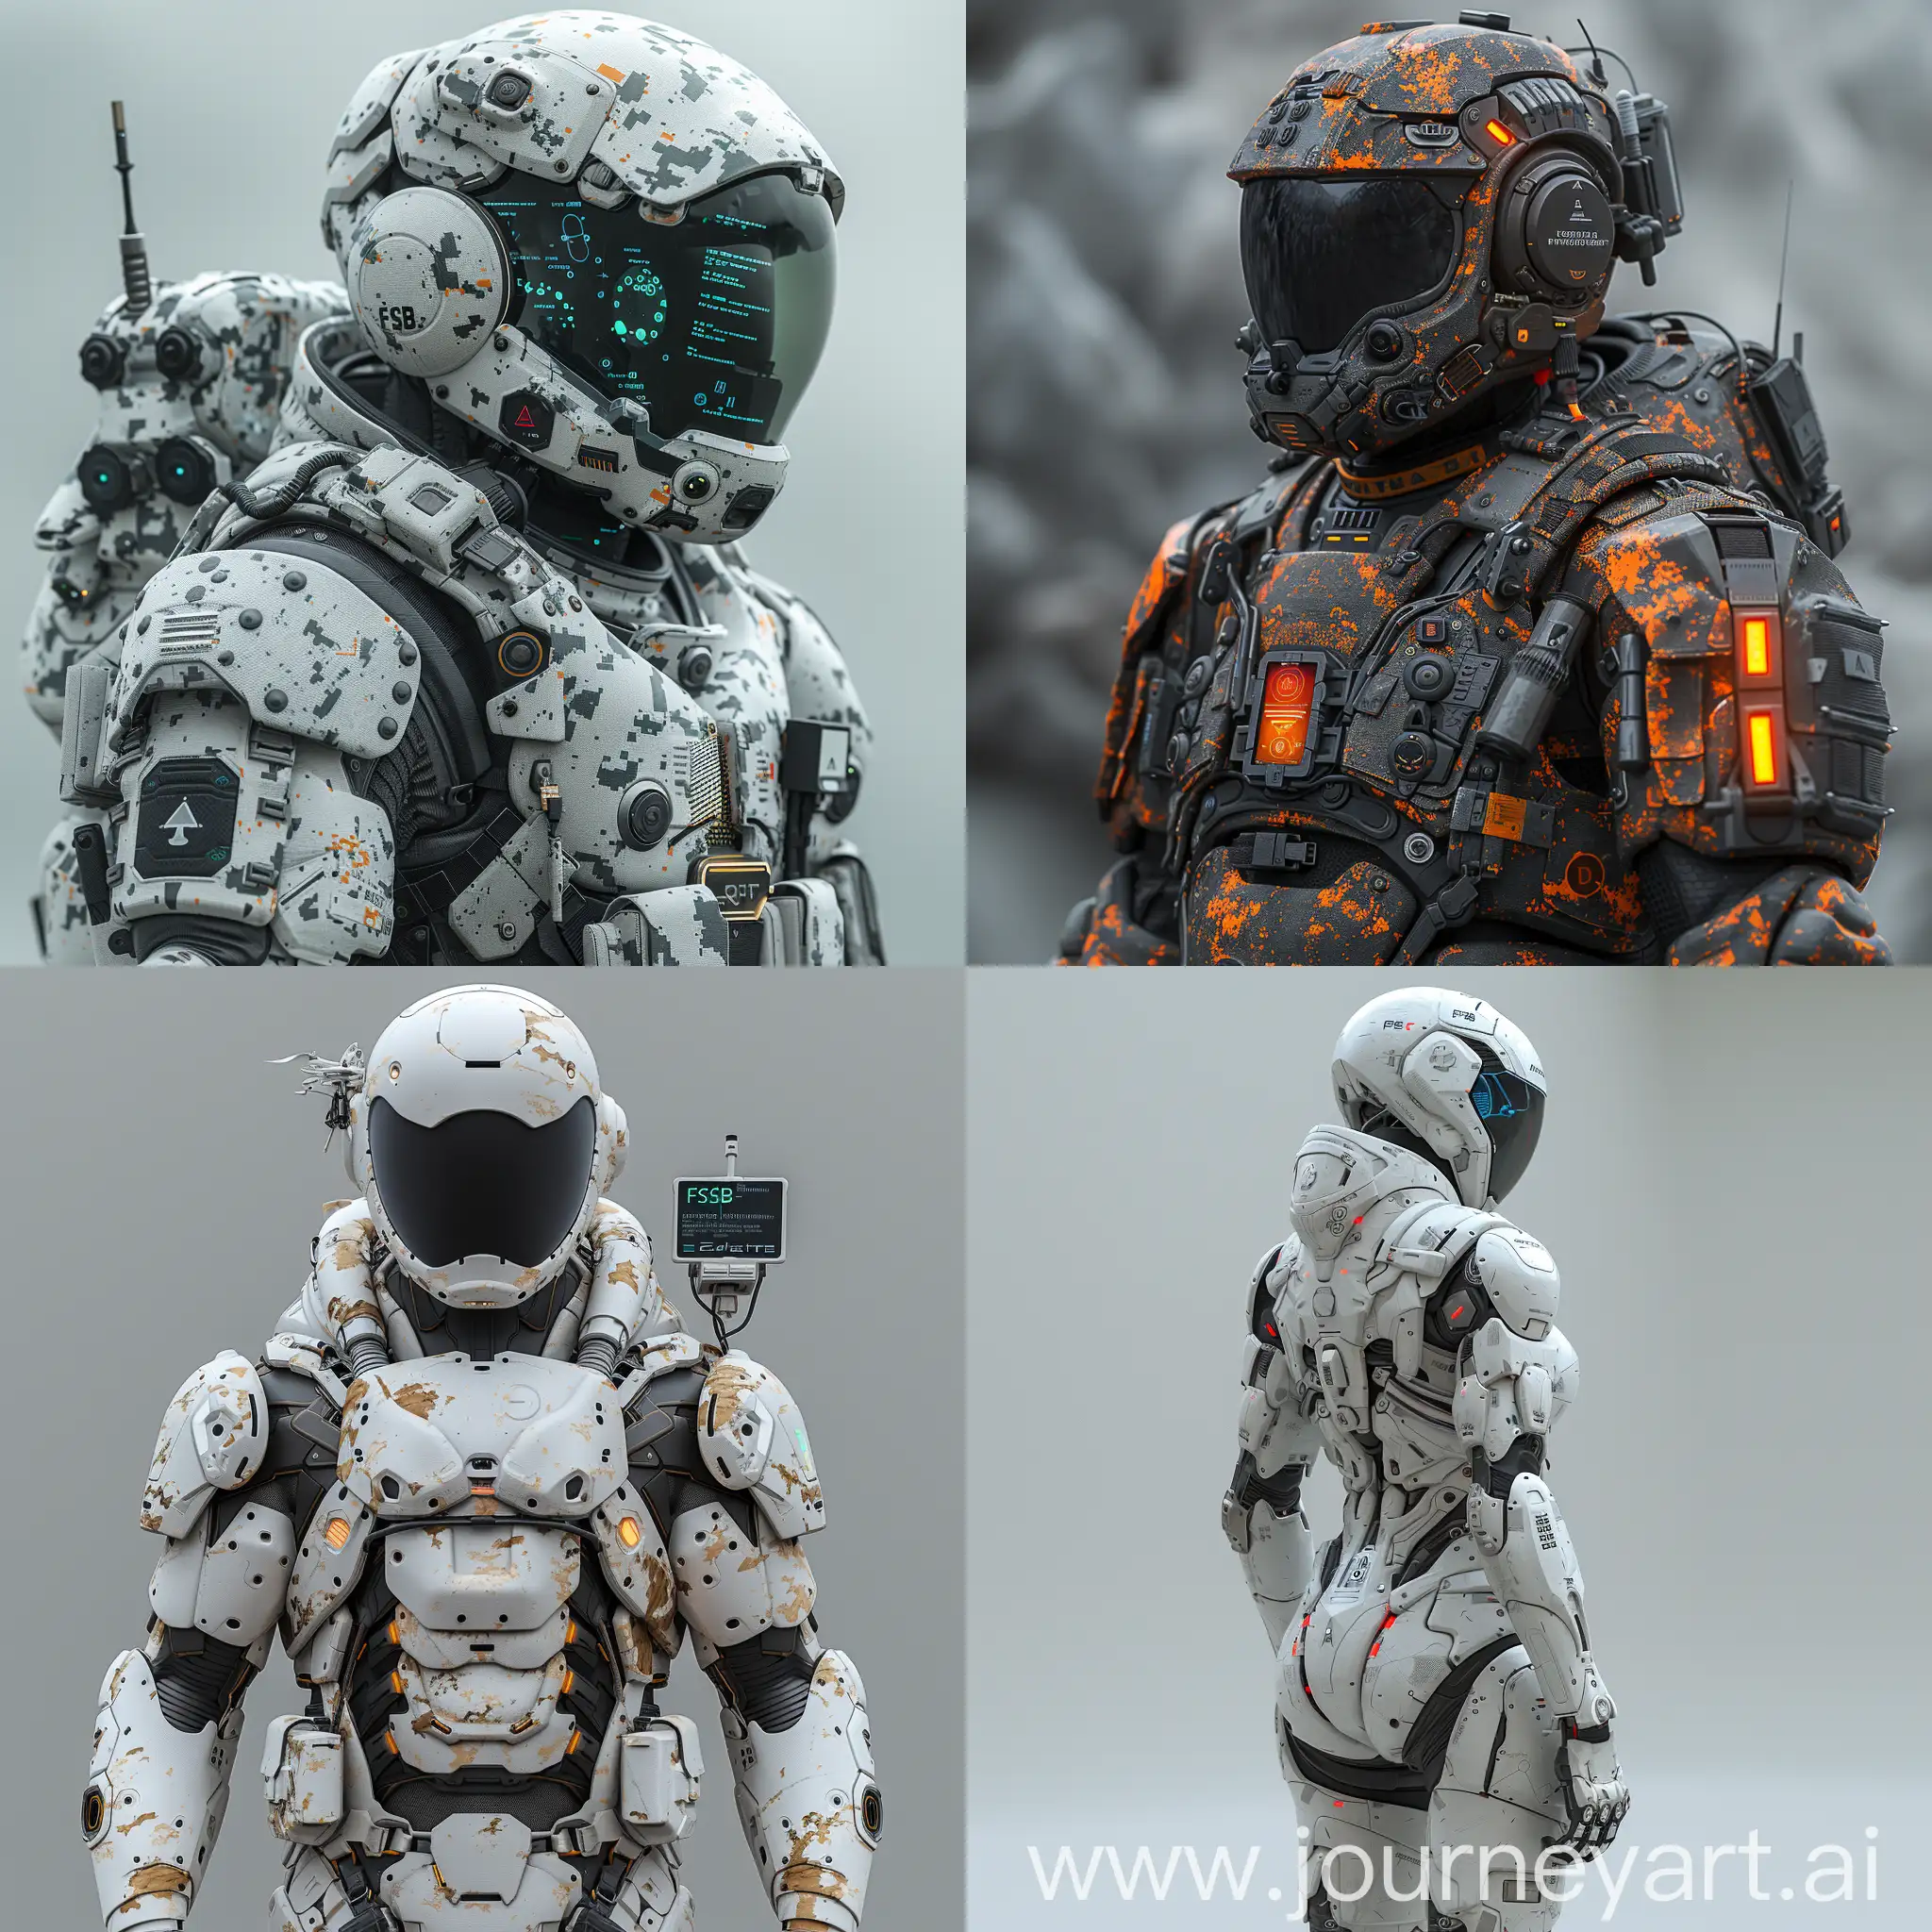 Imaginative futuristic FSB suit, Adaptive Camouflage Skin, Biometric Monitoring System, Enhanced Exoskeleton, Integrated Communication Array, Heads-Up Display (HUD):, Nano-Medical Injectors, Energy Shielding, Multi-Spectrum Vision Modes, Self-Repairing Armor, Silent Movement Actuators, Cloud-Integrated Intelligence, Social Network Profiling Tools, Cyber Warfare Modules, Blockchain-Based Identification, Quantum Encryption, Big Data Analytics Engine, Virtual Training Environment, Internet of Things (IoT) Integration, Automated Language Translation, Remote Drone Control Interface, Morphing Outer Shell, Solar Power Panels, Holographic Projection Unit, Environmental Adaptation Systems, Stealth Coating, Utility Drones, Weapon Integration, Grapple-Hook Launchers, Emergency Medical Pod, Detachable Reconnaissance Modules, Wi-Fi Signal Boosters, Data Stream Projectors, Crowdsourced Intelligence Gathering, Hack-Proof Firewalls, Peer-to-Peer Network Nodes, Digital Camouflage, Interactive Surface, Global Positioning System (GPS) Enhancers, E-Paper Displays, Remote Sensing Arrays, unreal engine 5 --stylize 1000